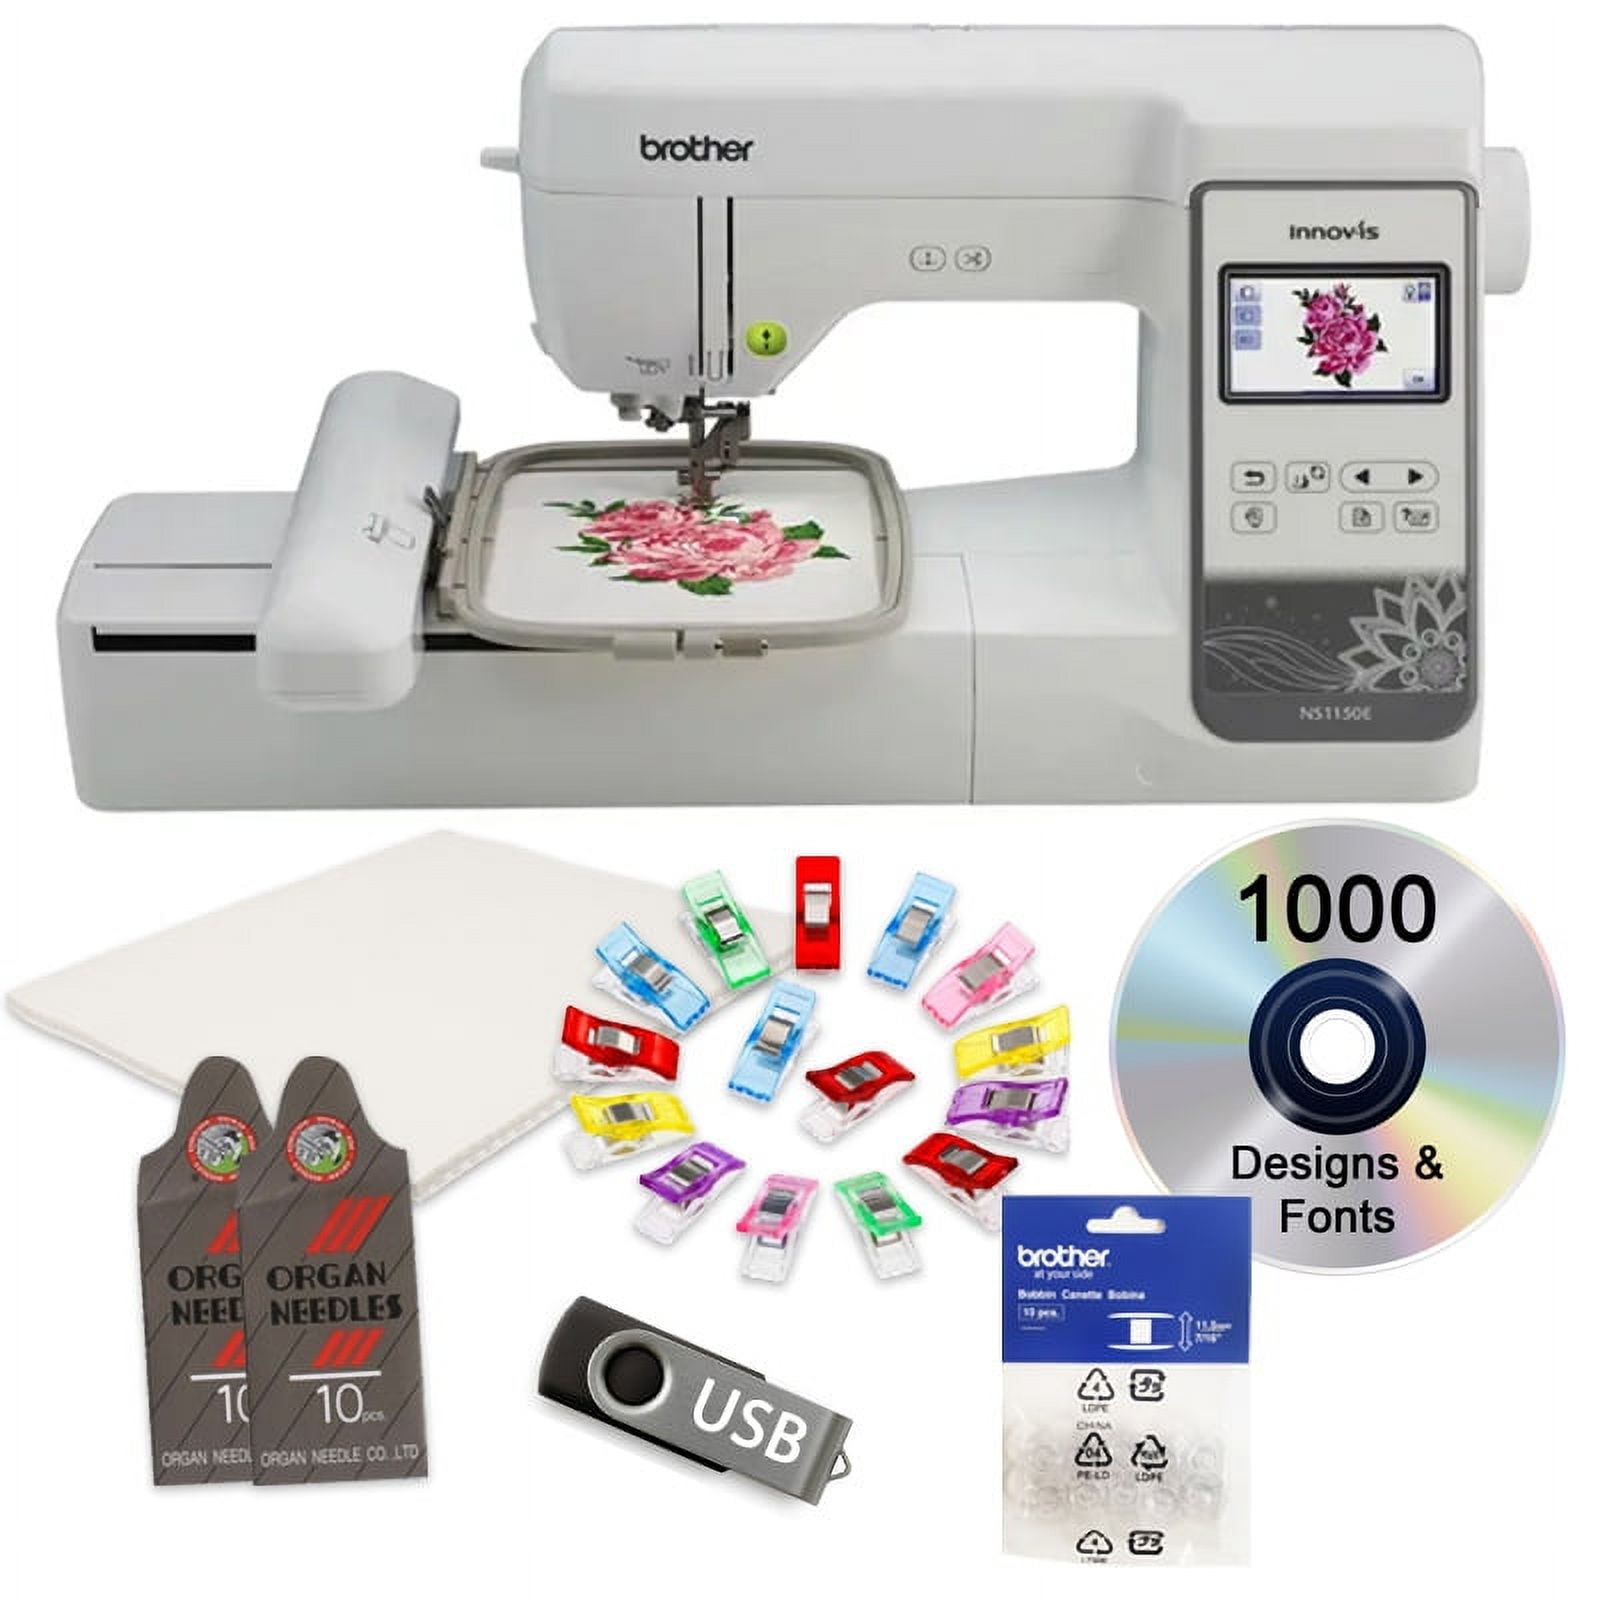 Replying to @Callme𝙃𝙔𝘿𝙀 Brother PE800#embroideryderymachine #broth, Embroidery Machine